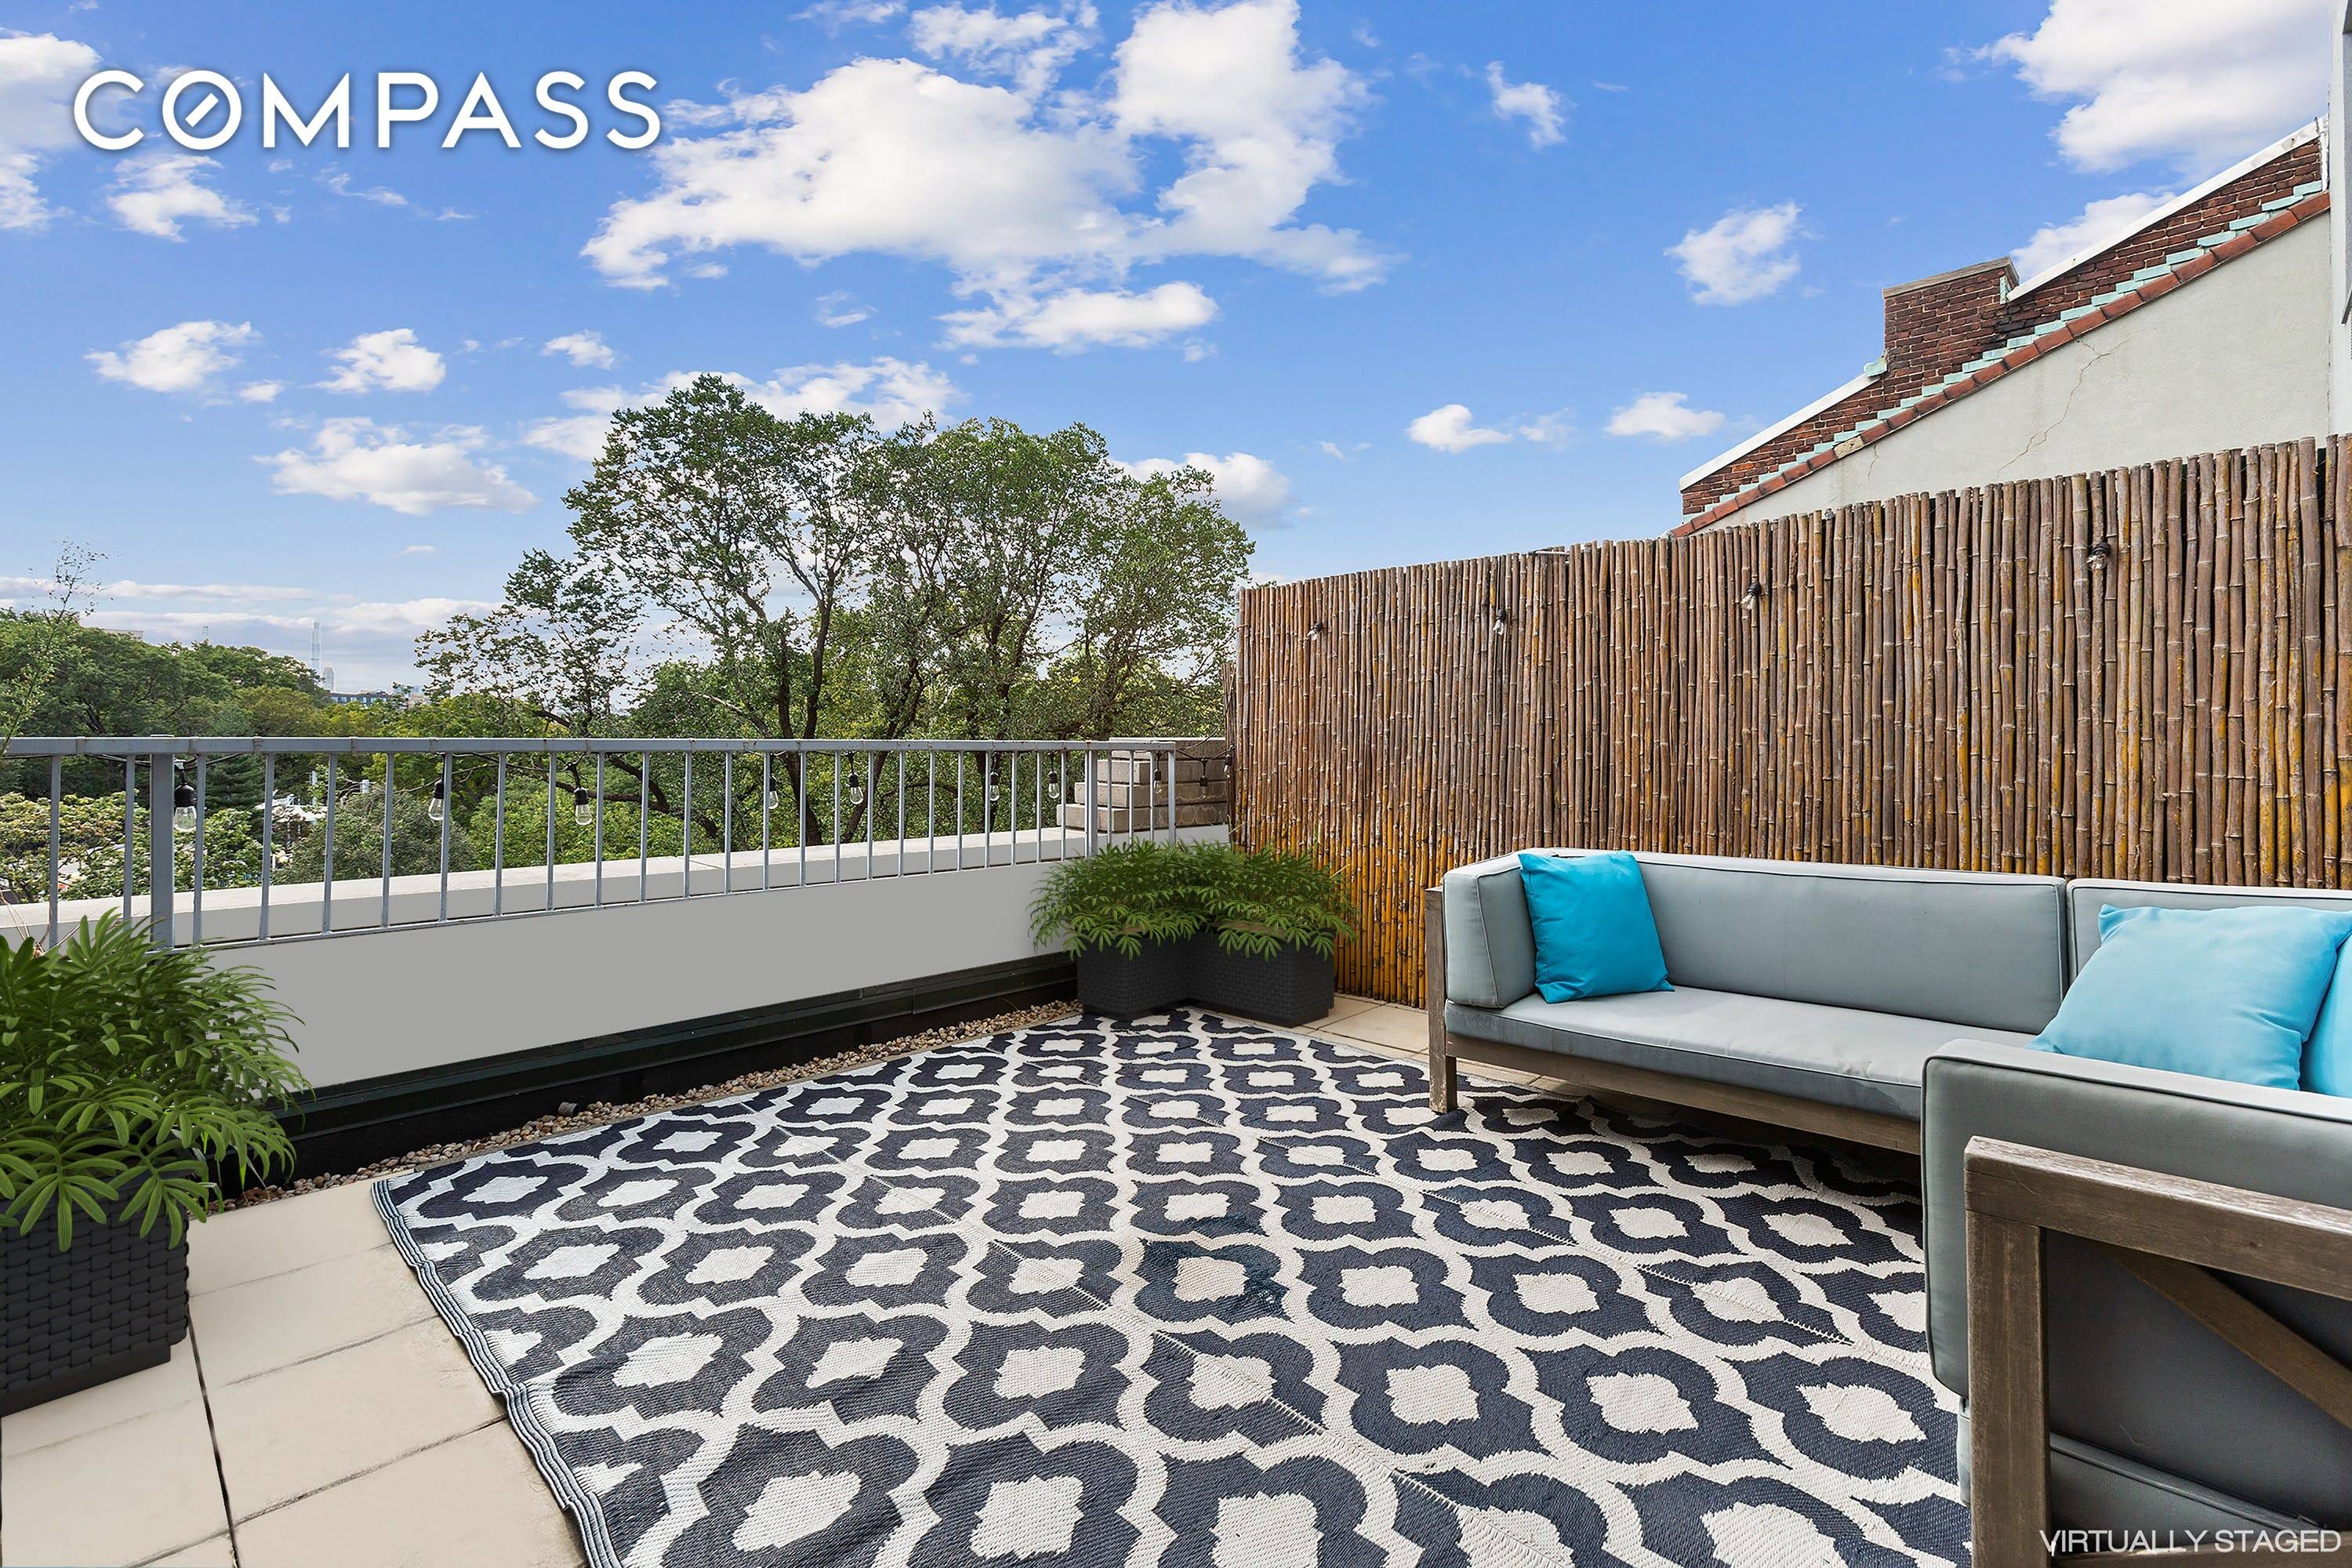 CONDO RULES, A PRIVATE OUTDOOR TERRACE, A DEEDED PARKING SPACE and NO MAXIMUM LIMIT ON SUBLEASING !